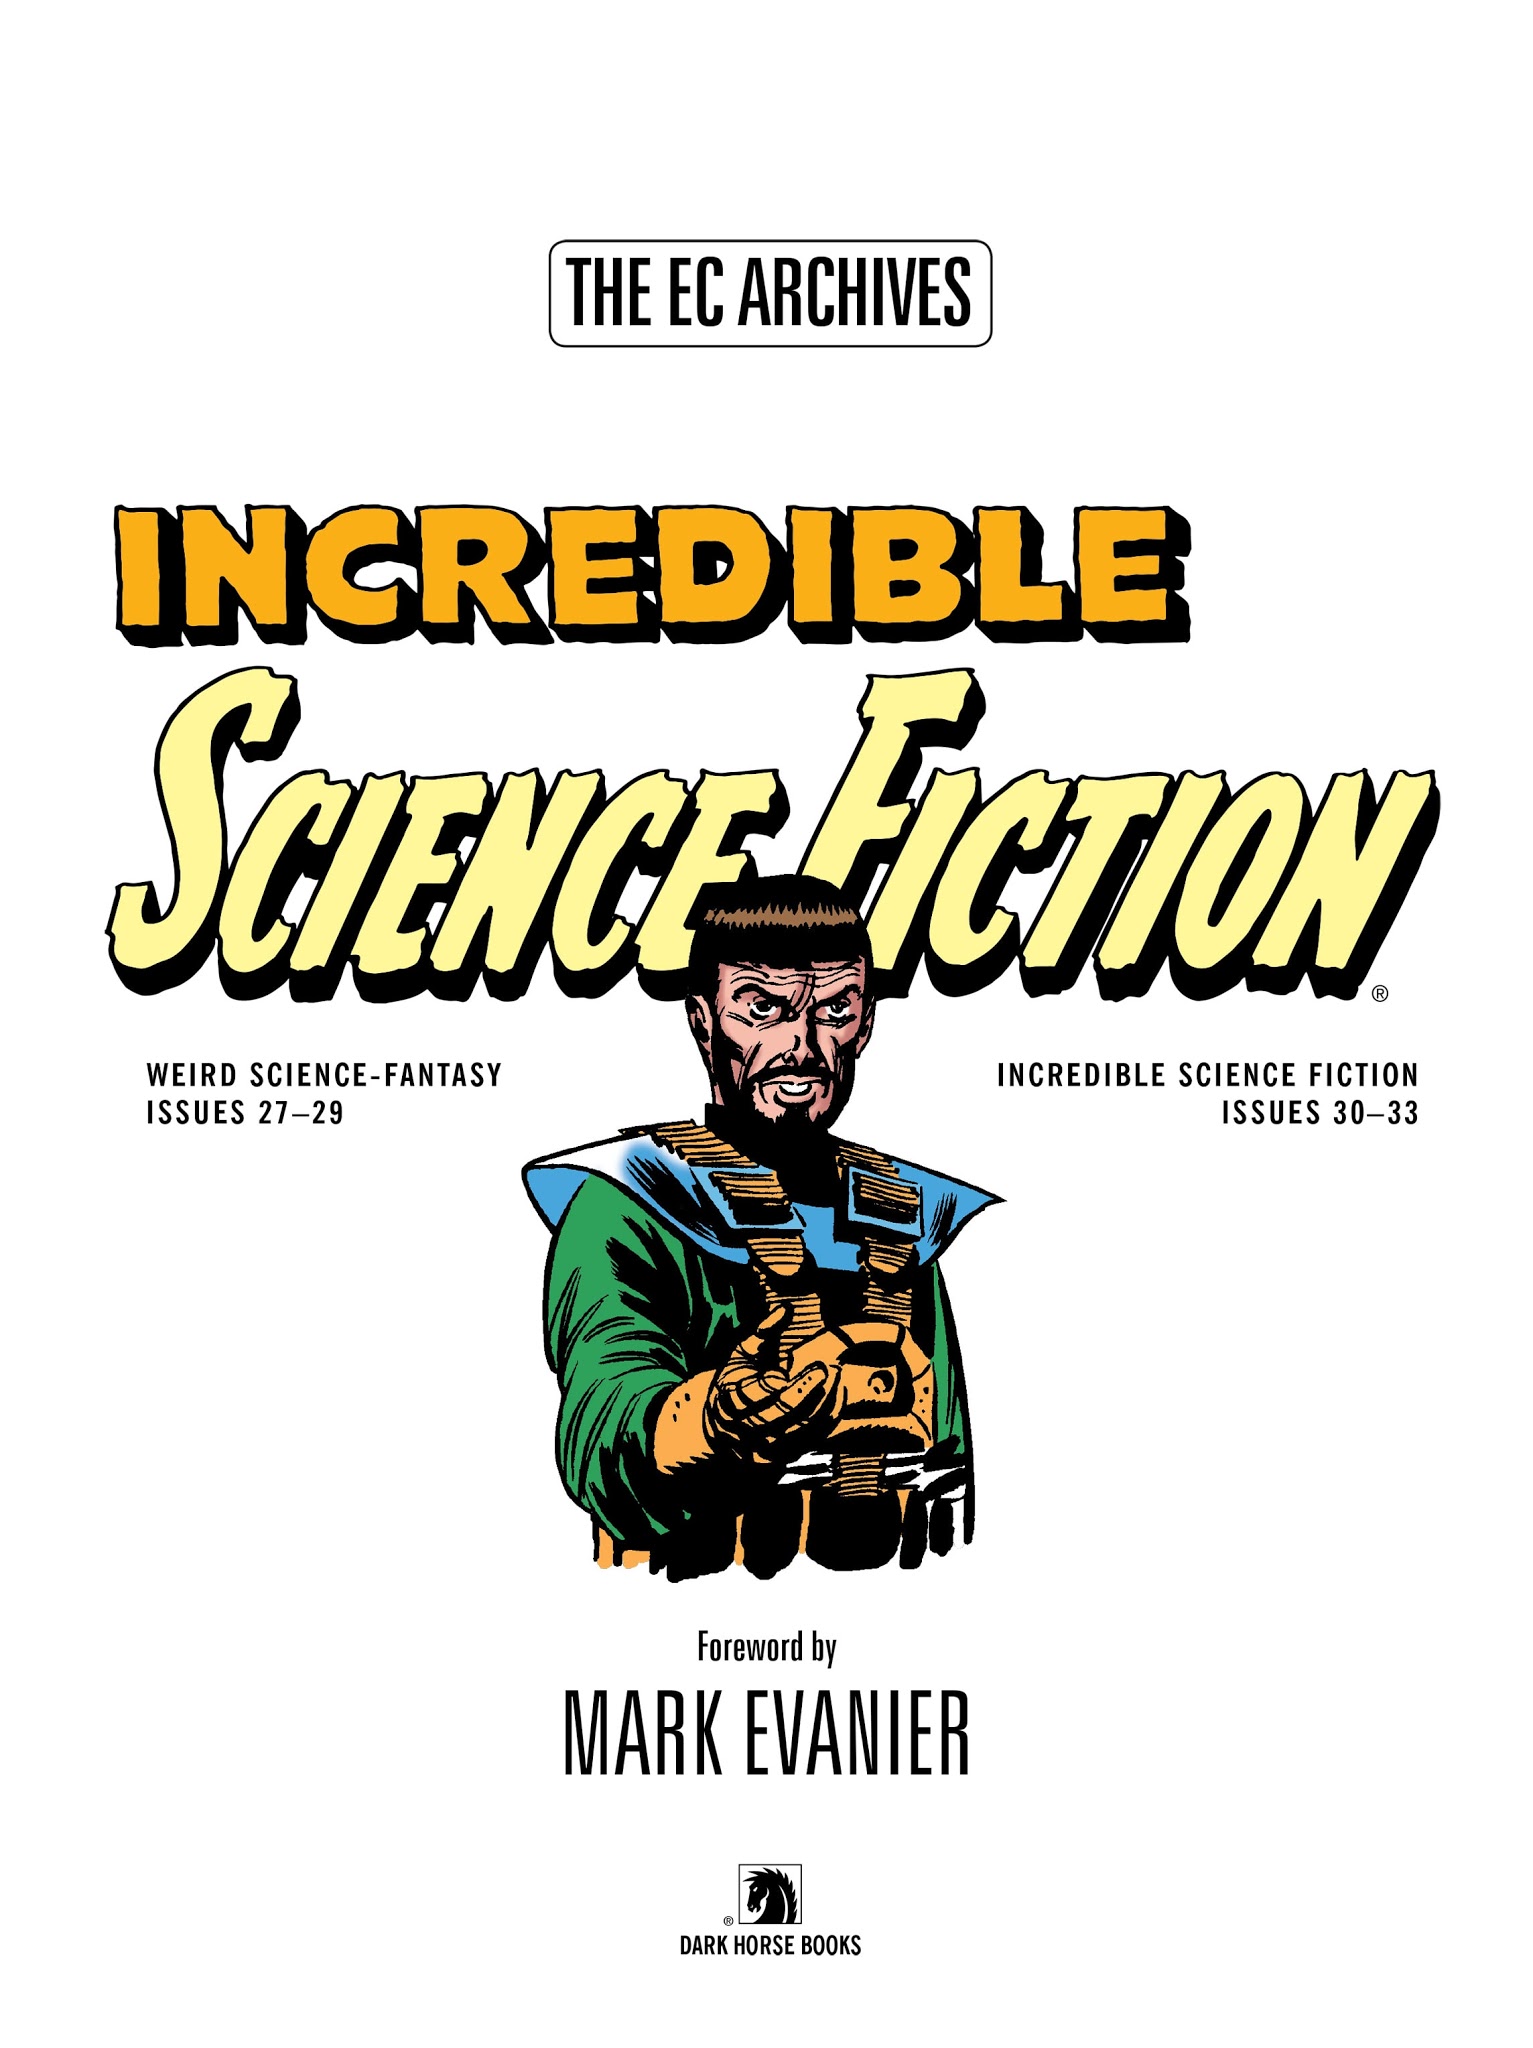 Read online The EC Archives: Incredible Science Fiction comic -  Issue # TPB - 5